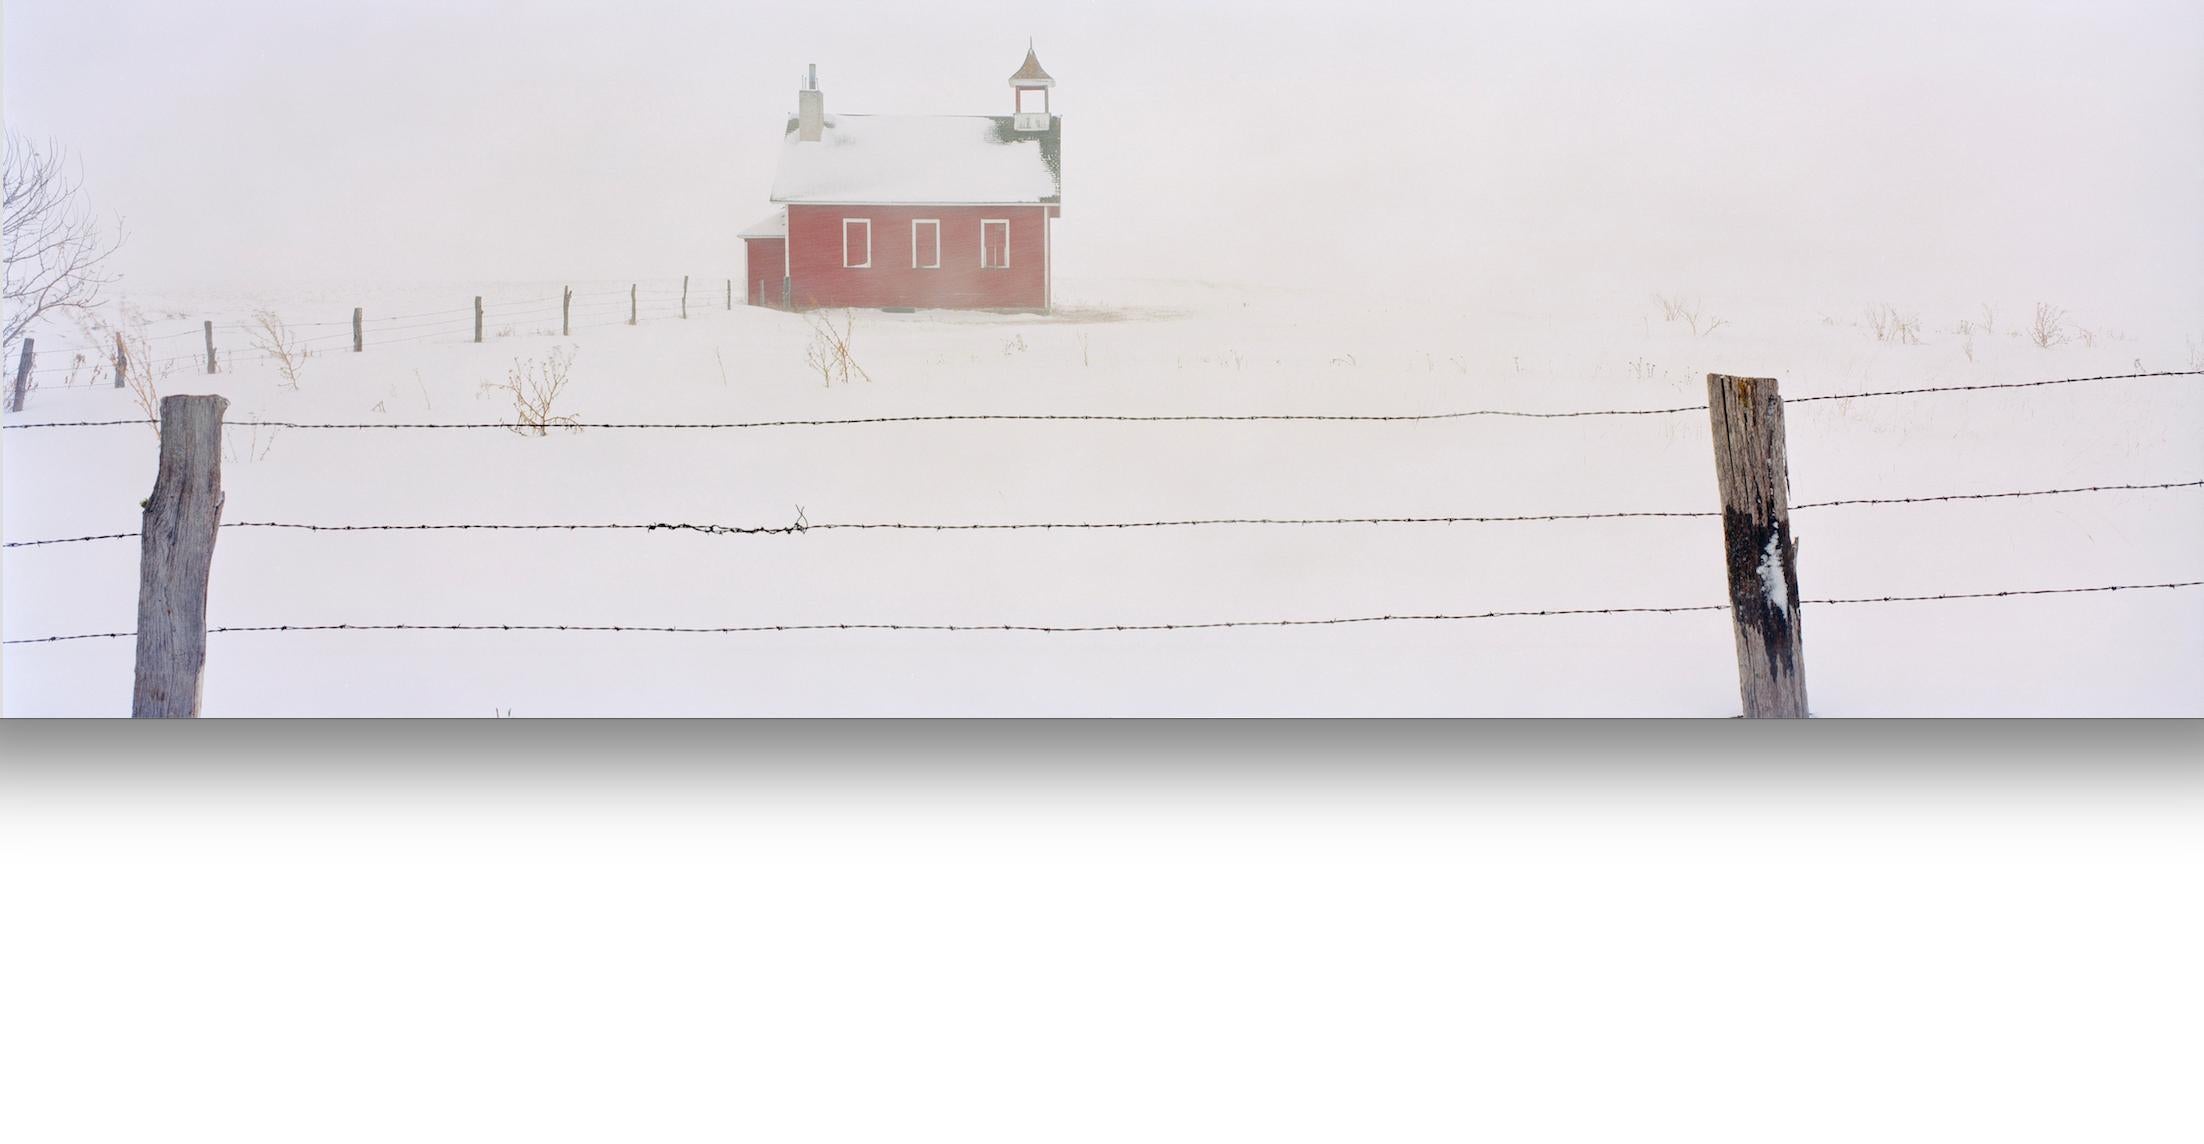 Maxwell Mackenzie Color Photograph - "Everts Township Schoolhouse winter" Stark panorama of school in snow on prairie